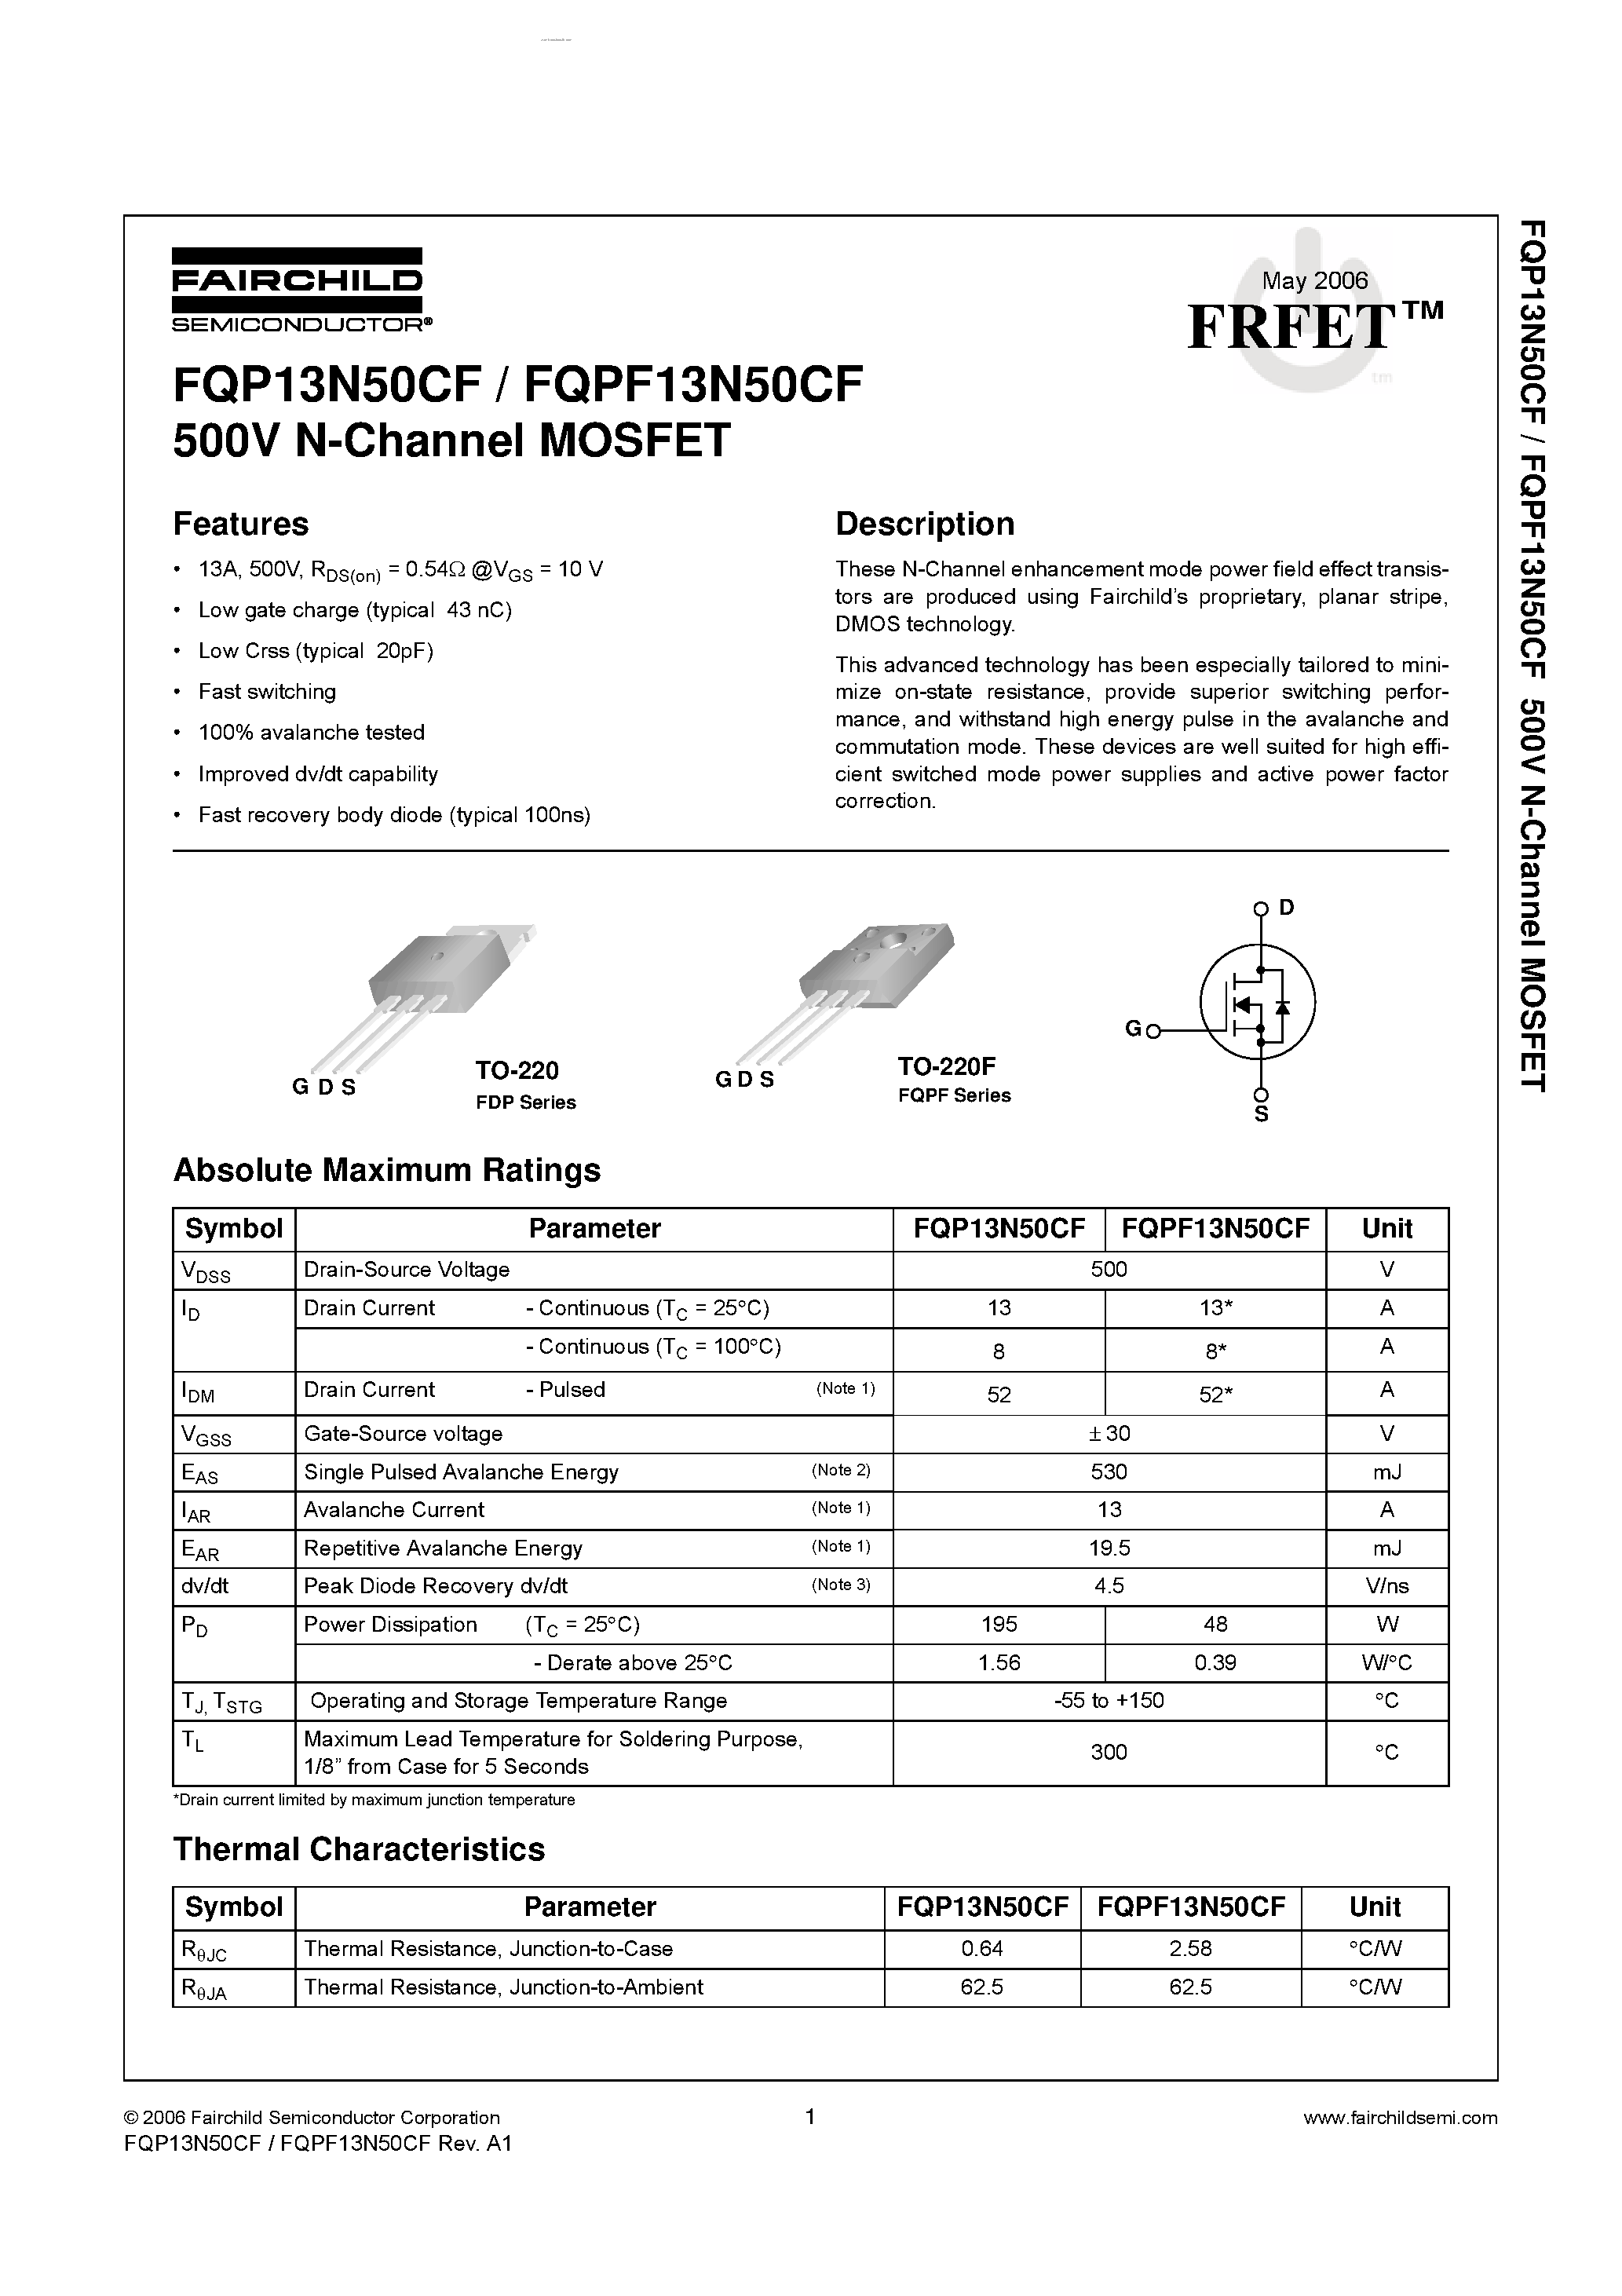 Datasheet FQP13N50CF - N-Channel MOSFET page 1